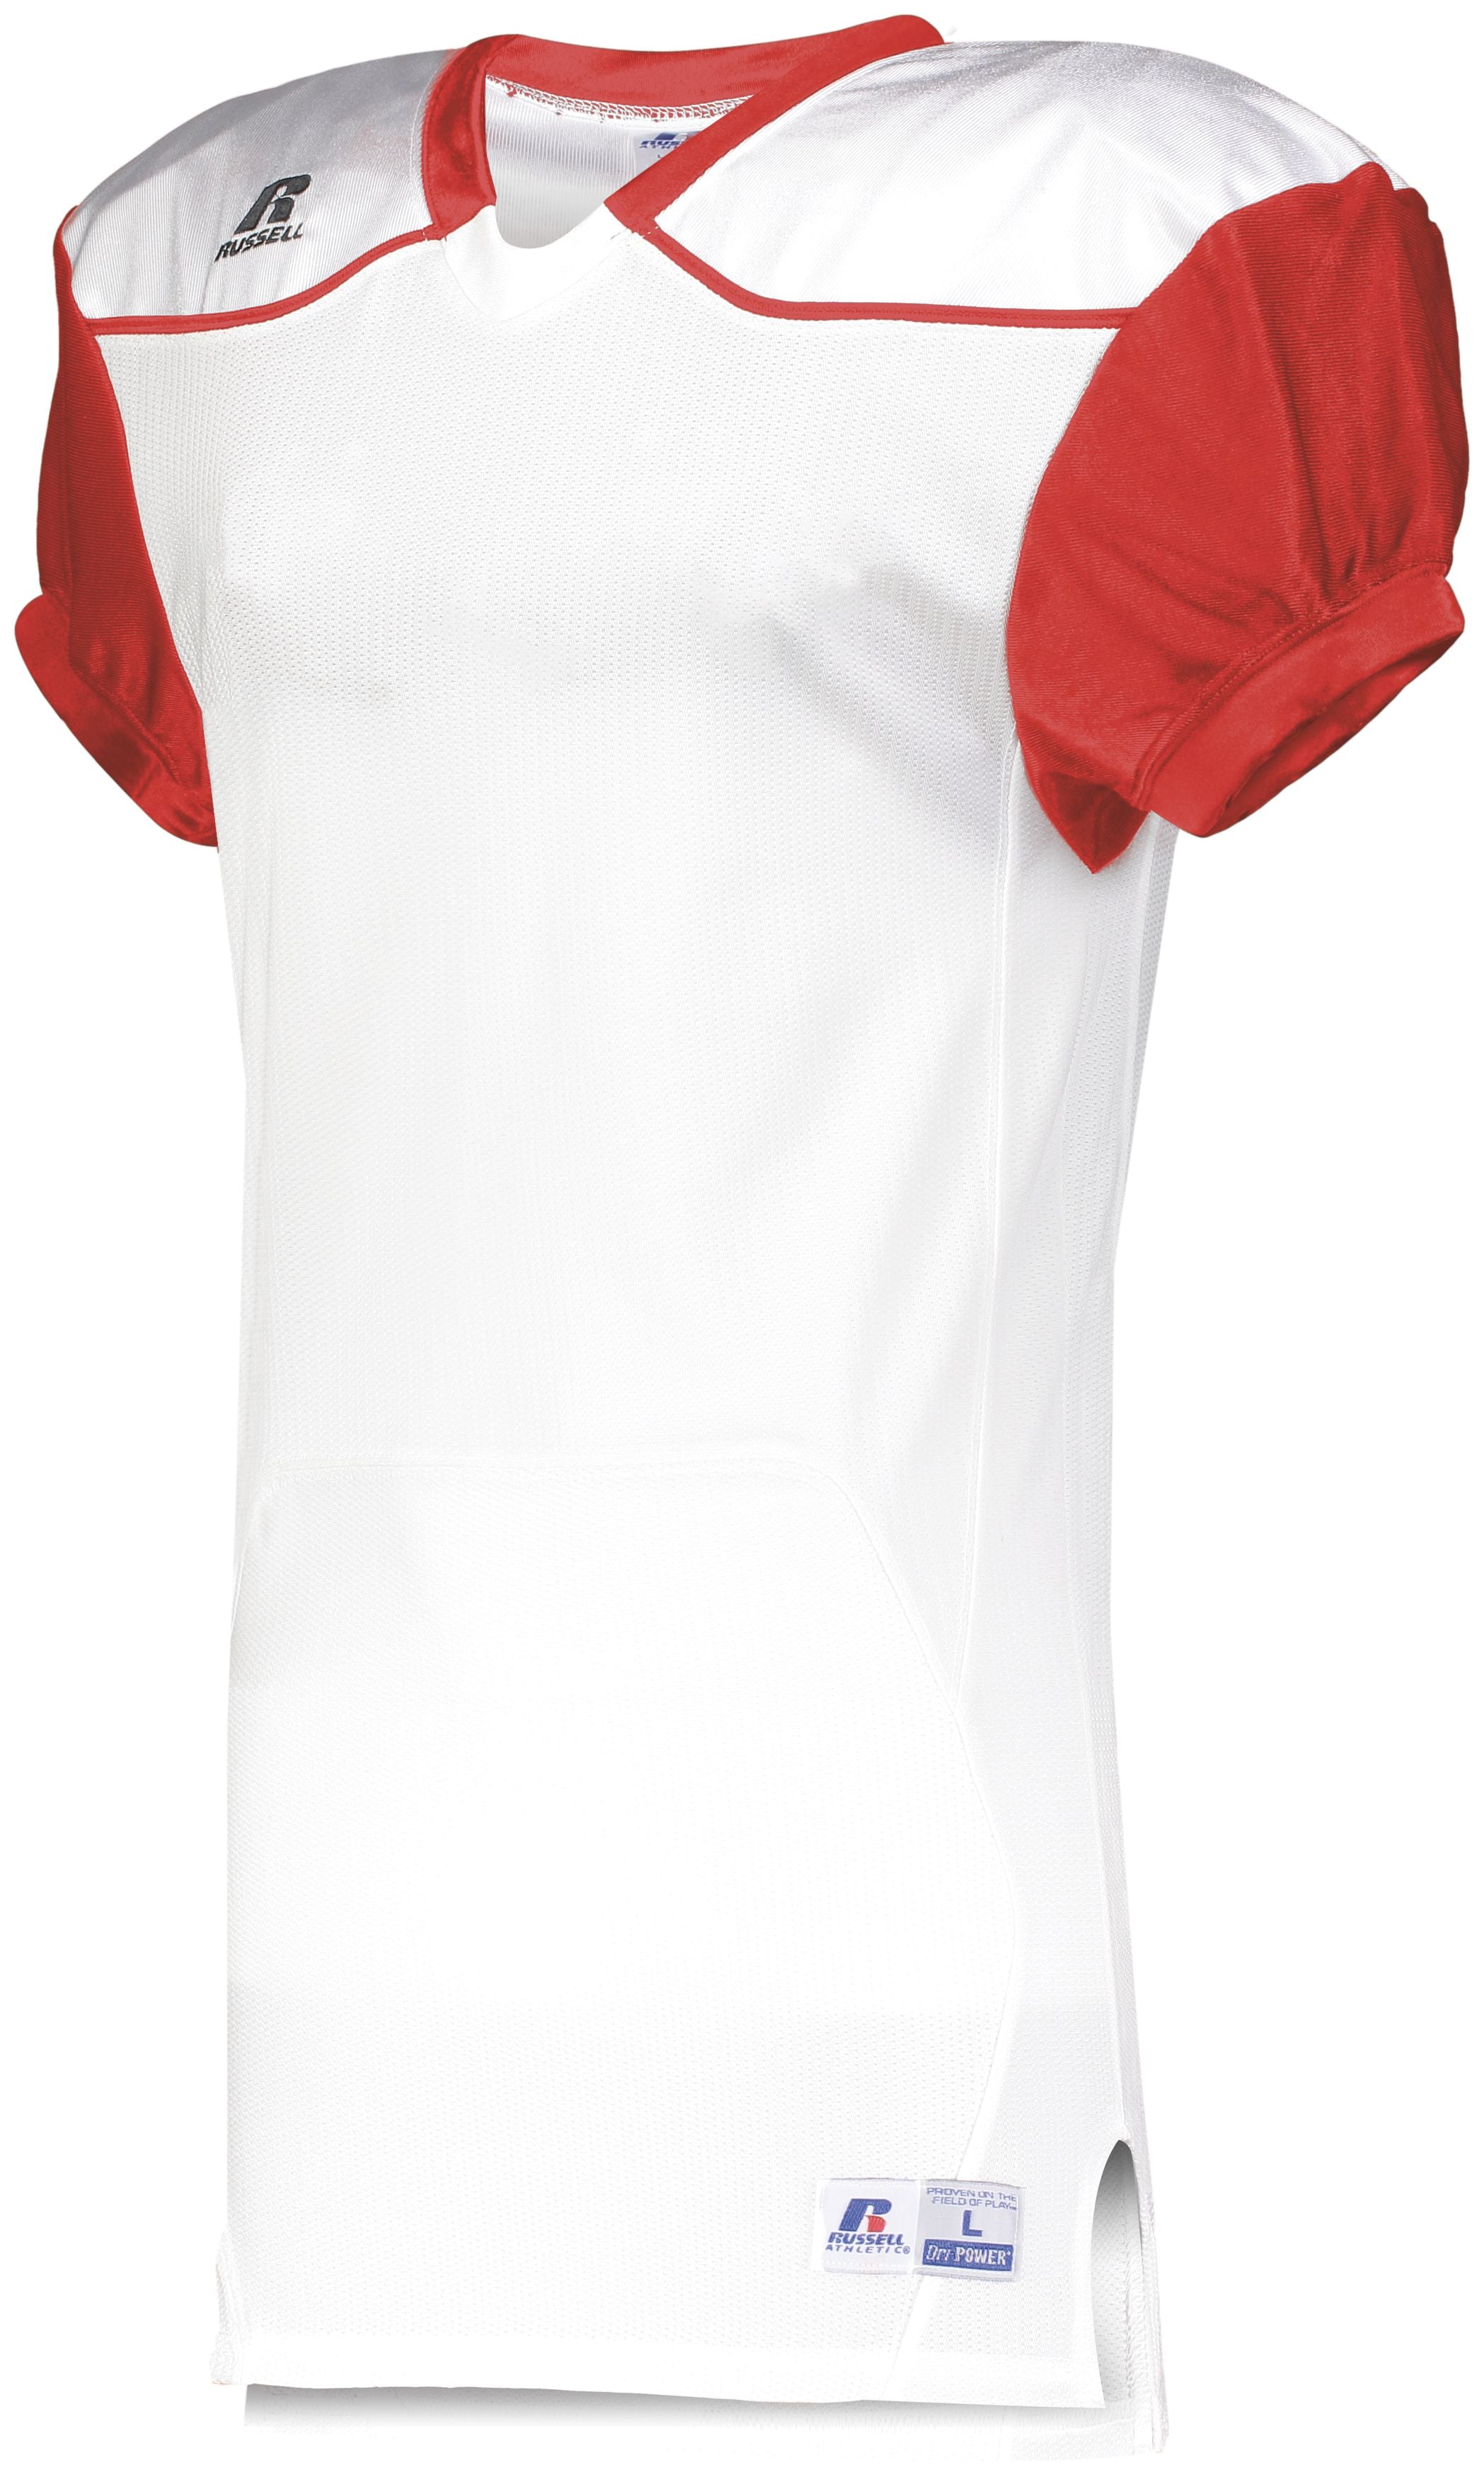 Russell Athletic Color Block Game Jersey (Away) in White/True Red  -Part of the Adult, Adult-Jersey, Football, Russell-Athletic-Products, Shirts, All-Sports, All-Sports-1 product lines at KanaleyCreations.com